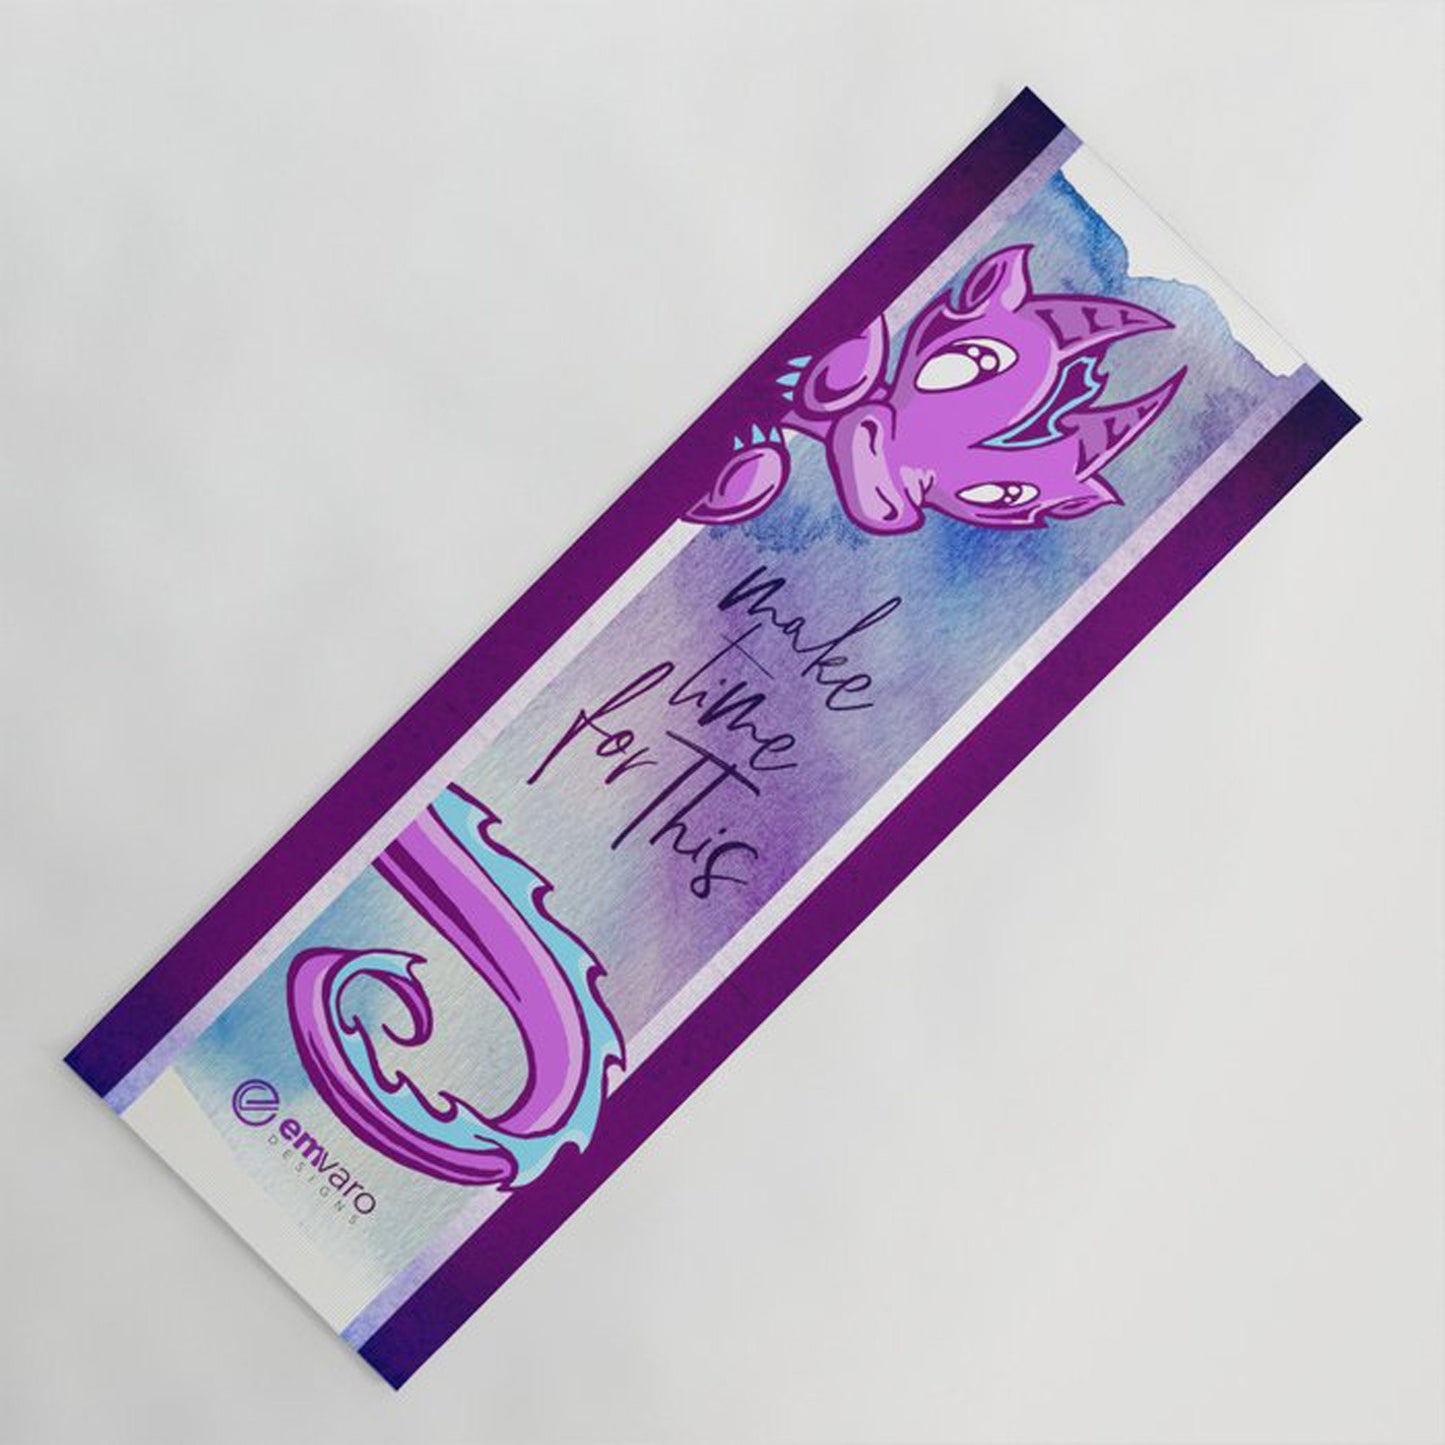 Yoga Mat: Make Time for This - Wisp the Dragon (3 colors)